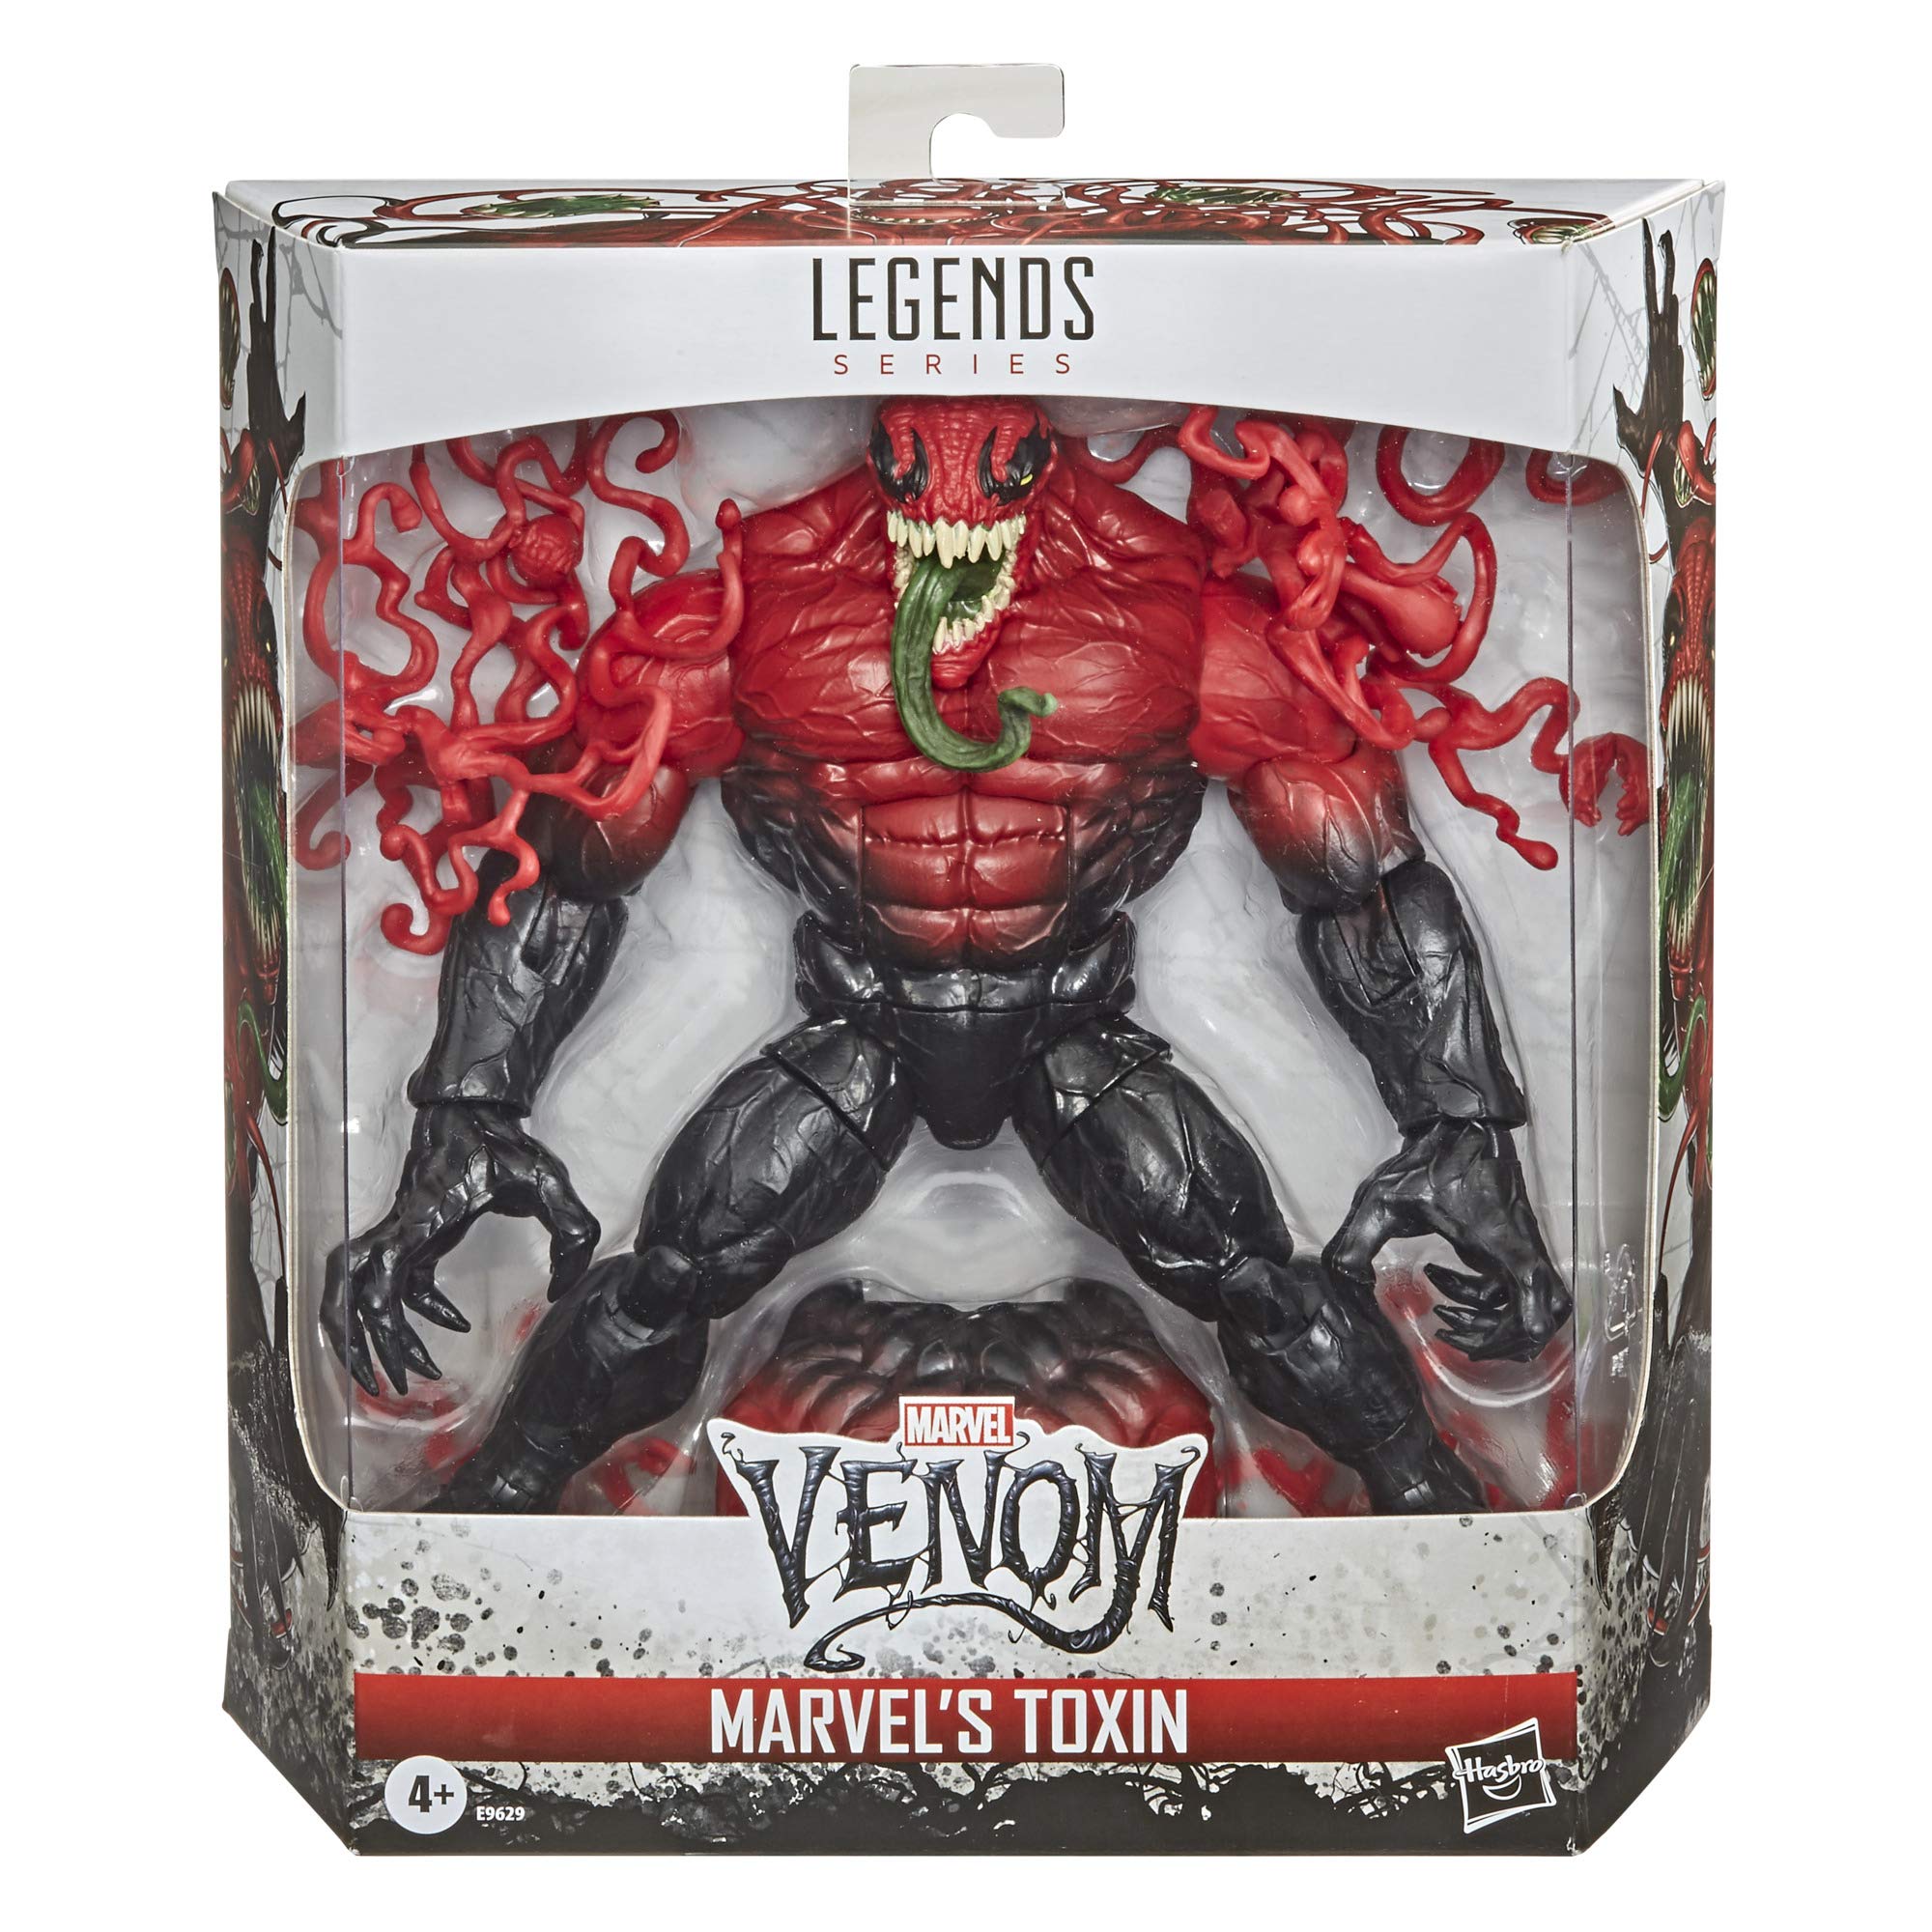 Marvel Classic Hasbro Marvel Legends Series 6-inch Collectible Marvel’s Toxin Action Figure Toy, Ages 4 and Up ,6 inches